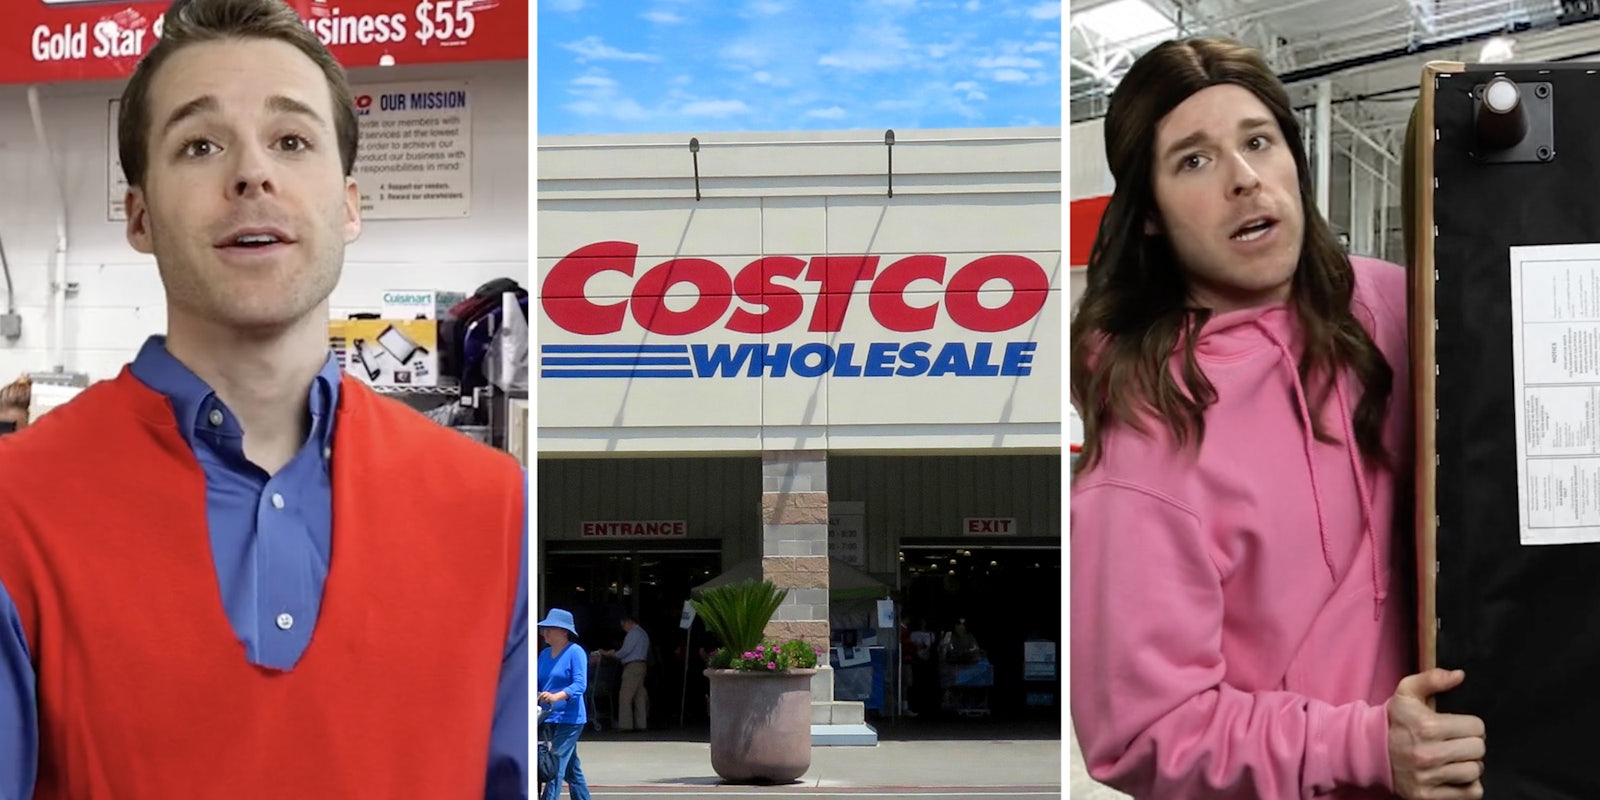 Costco Worker(l), Costco(c), woman with couch(r)